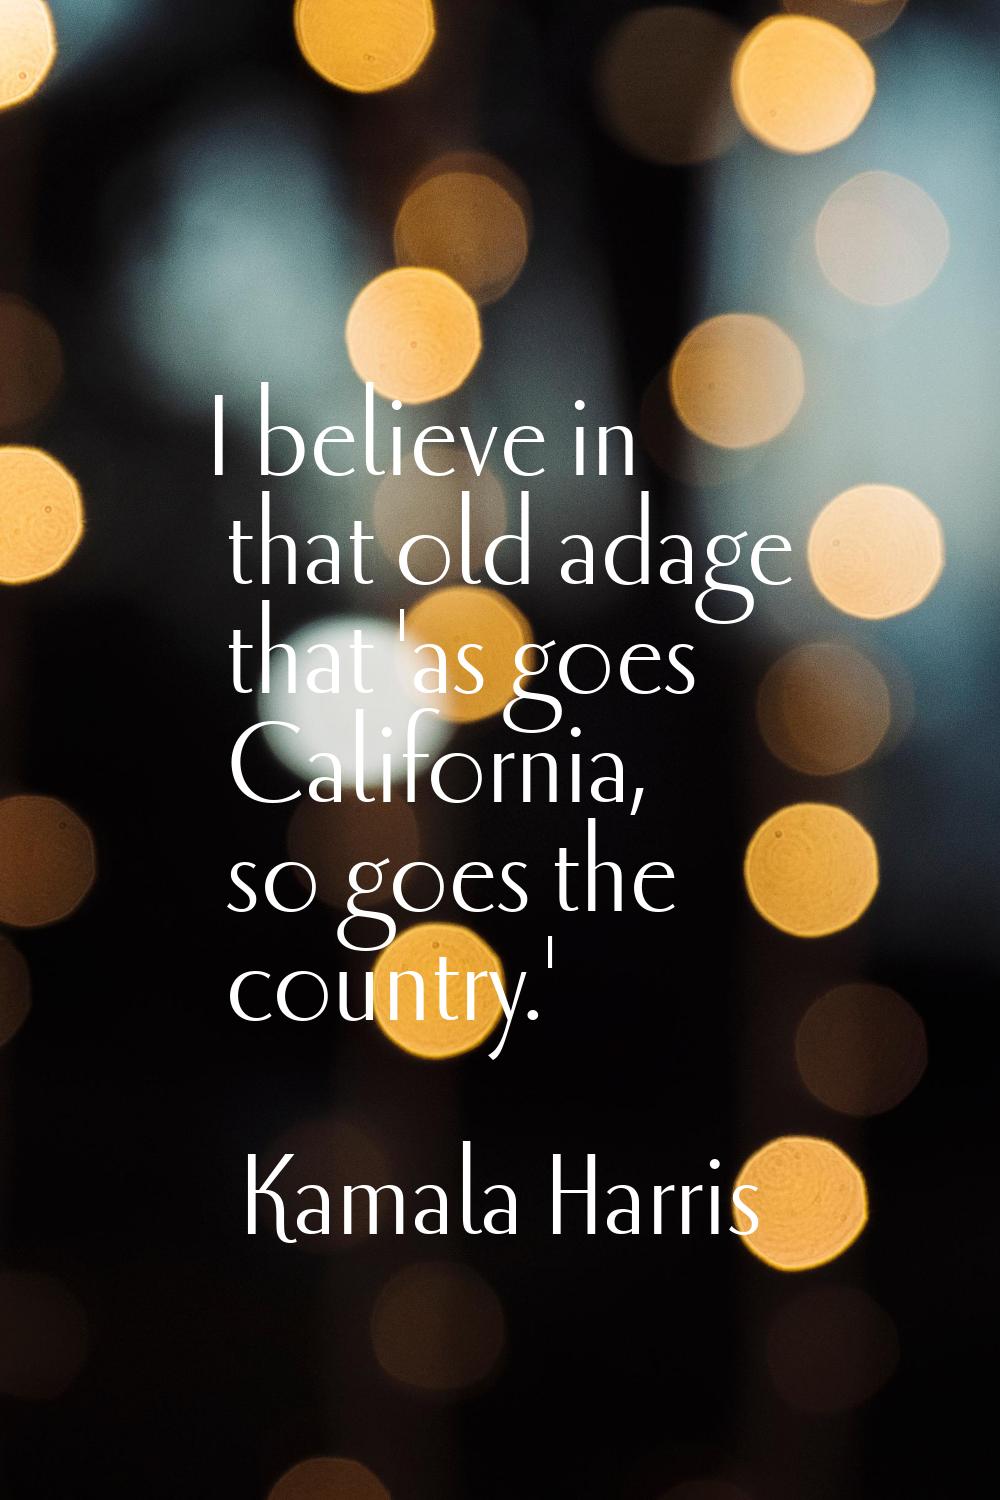 I believe in that old adage that 'as goes California, so goes the country.'